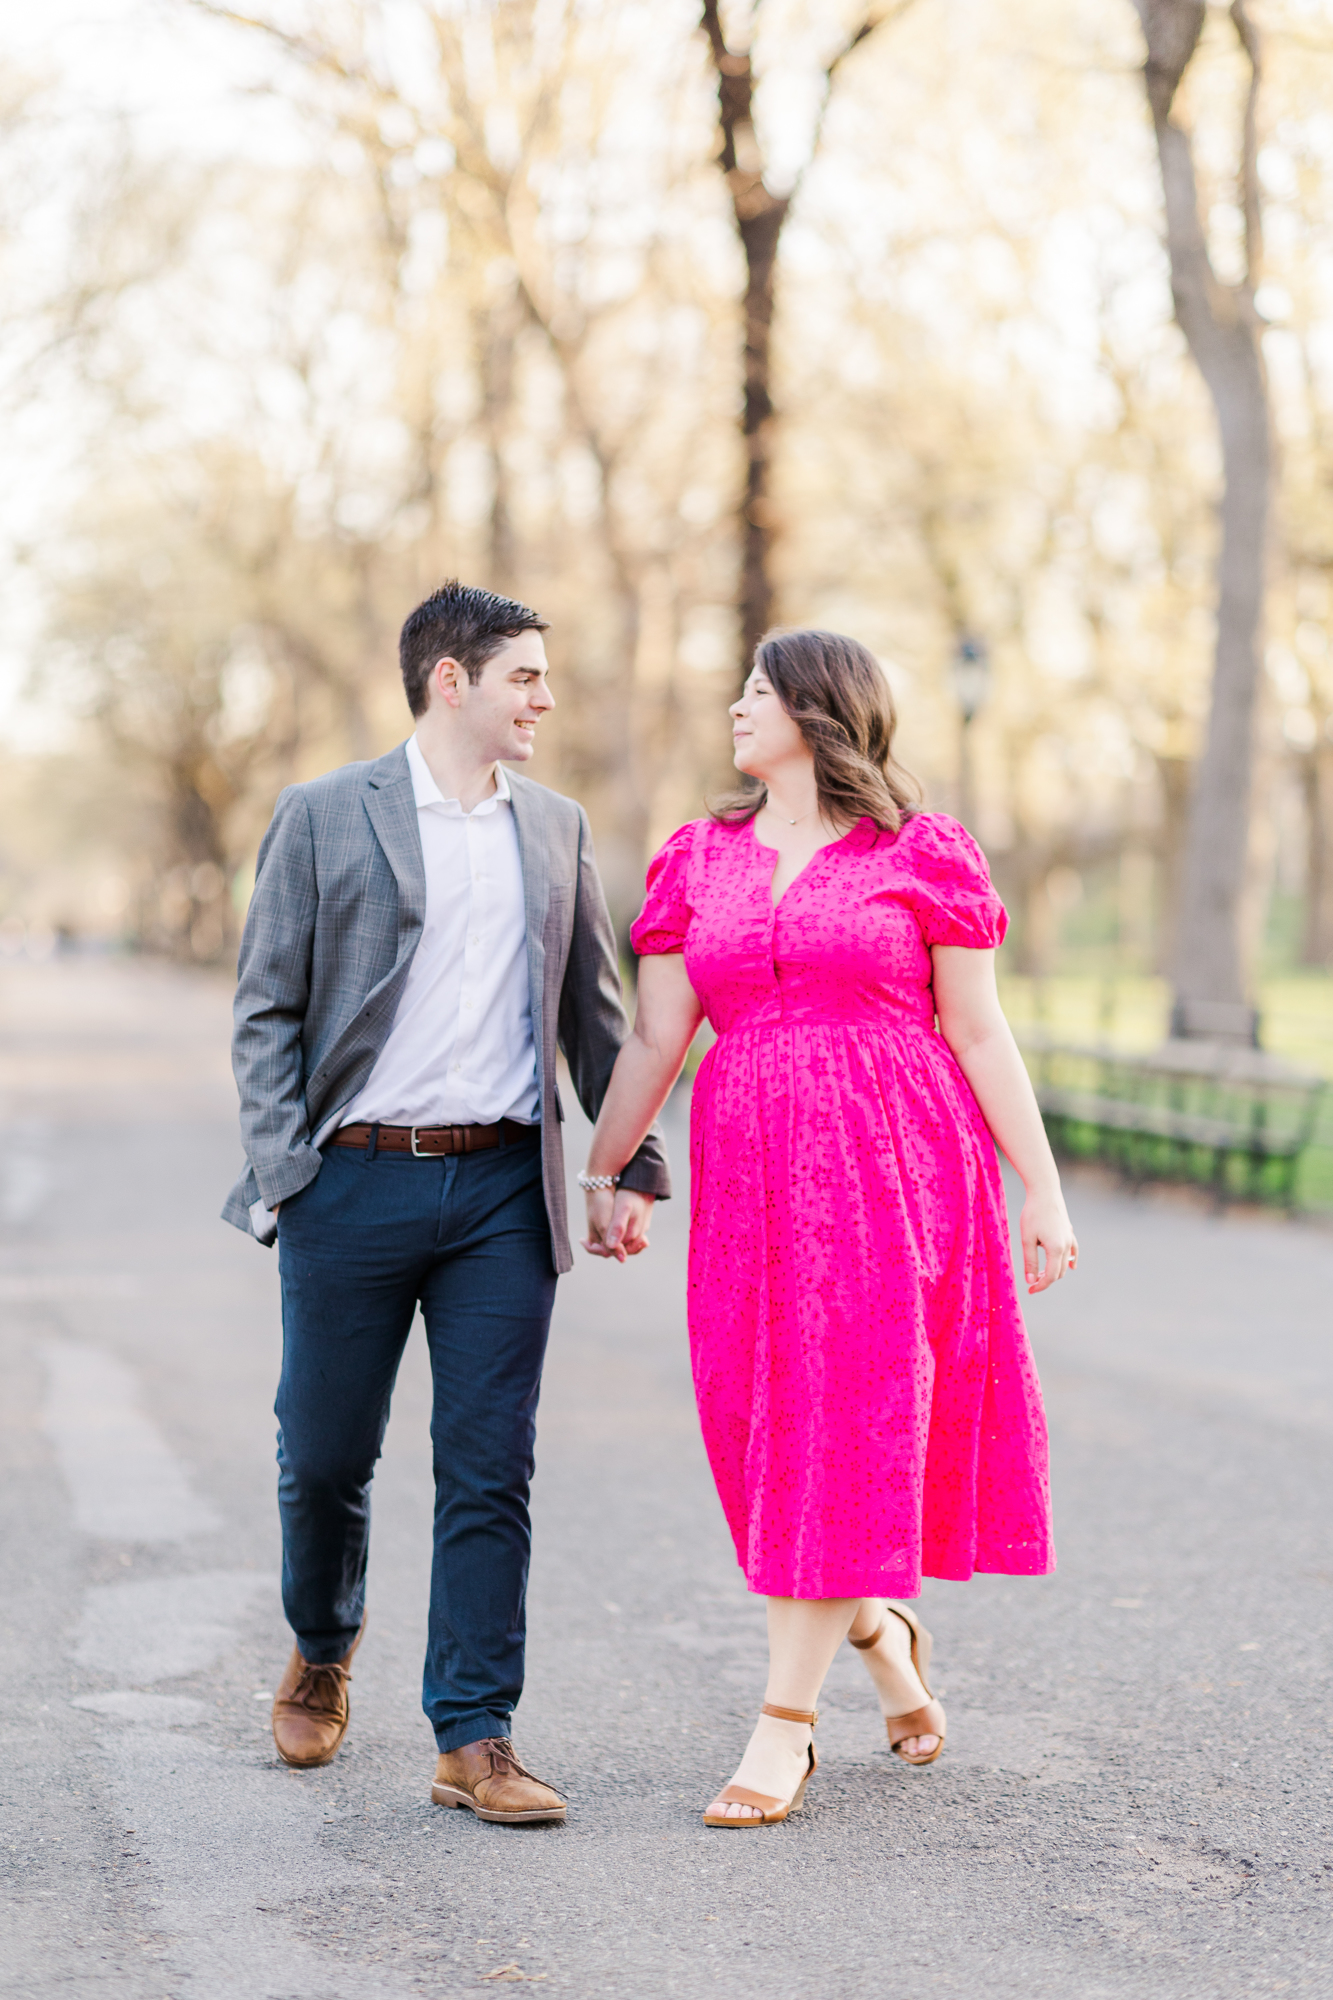 Cheerful Spring Engagement Photography in NYC